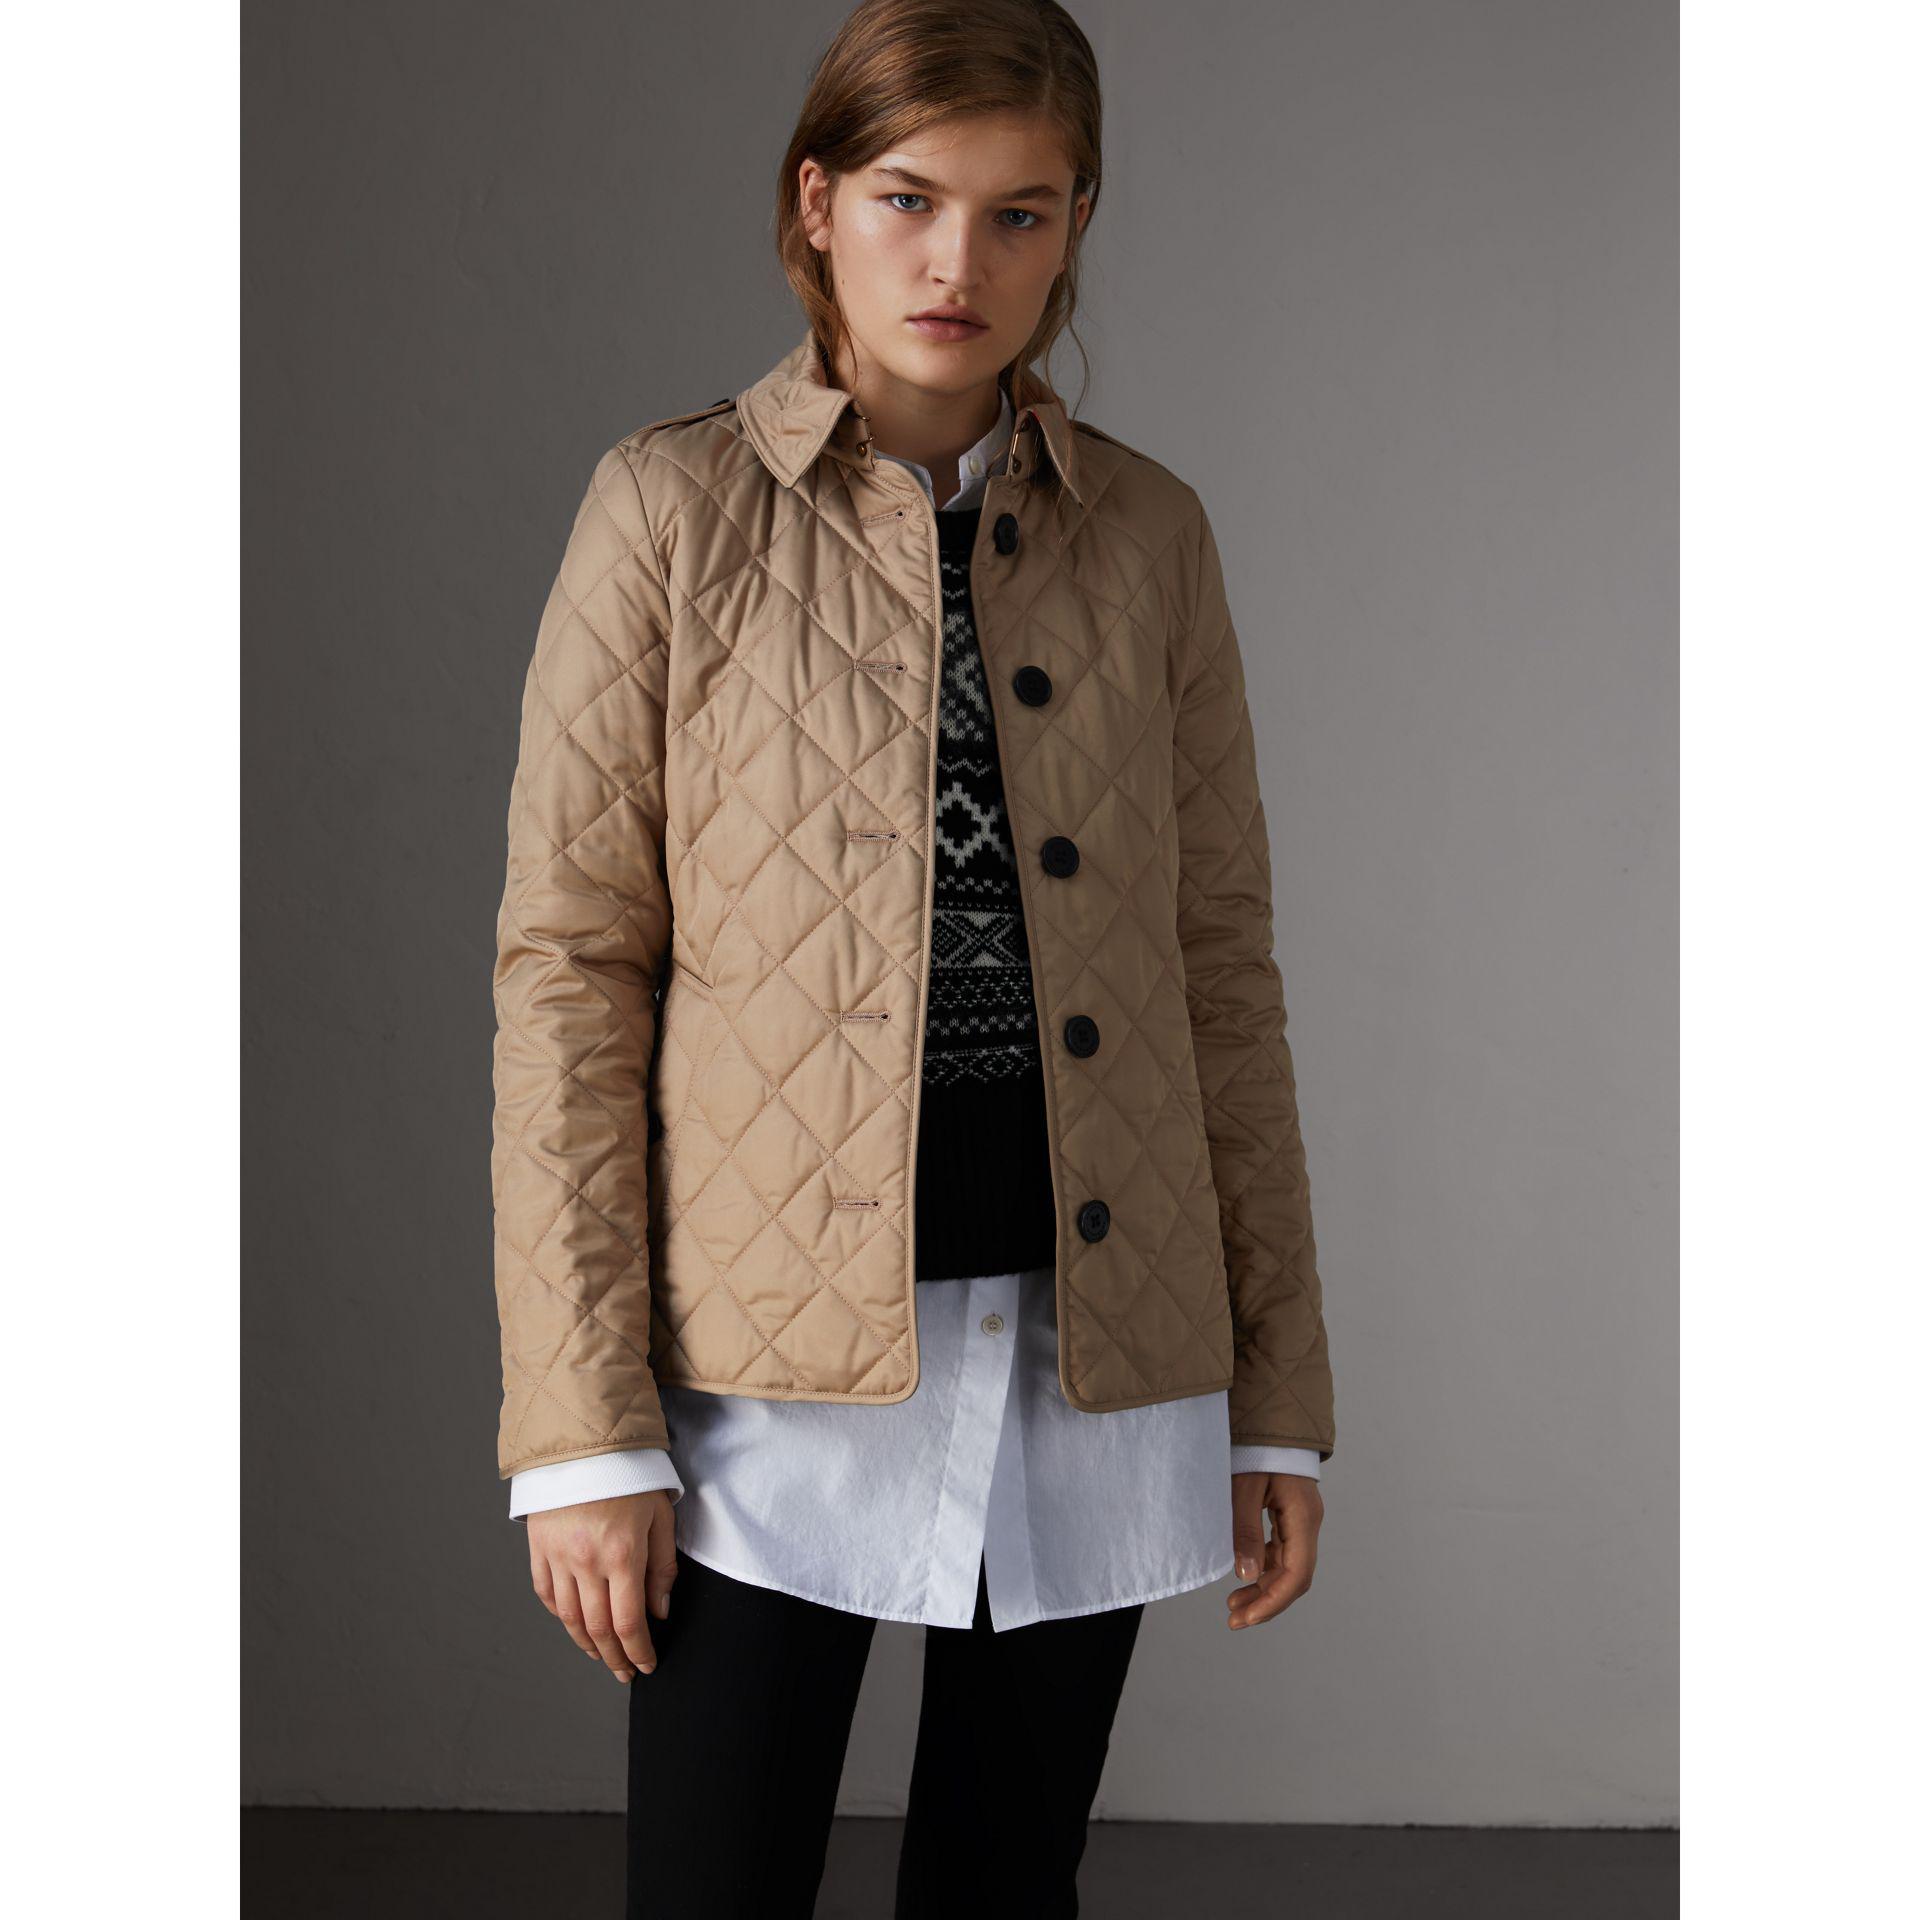 burberry frankby quilted jacket canvas